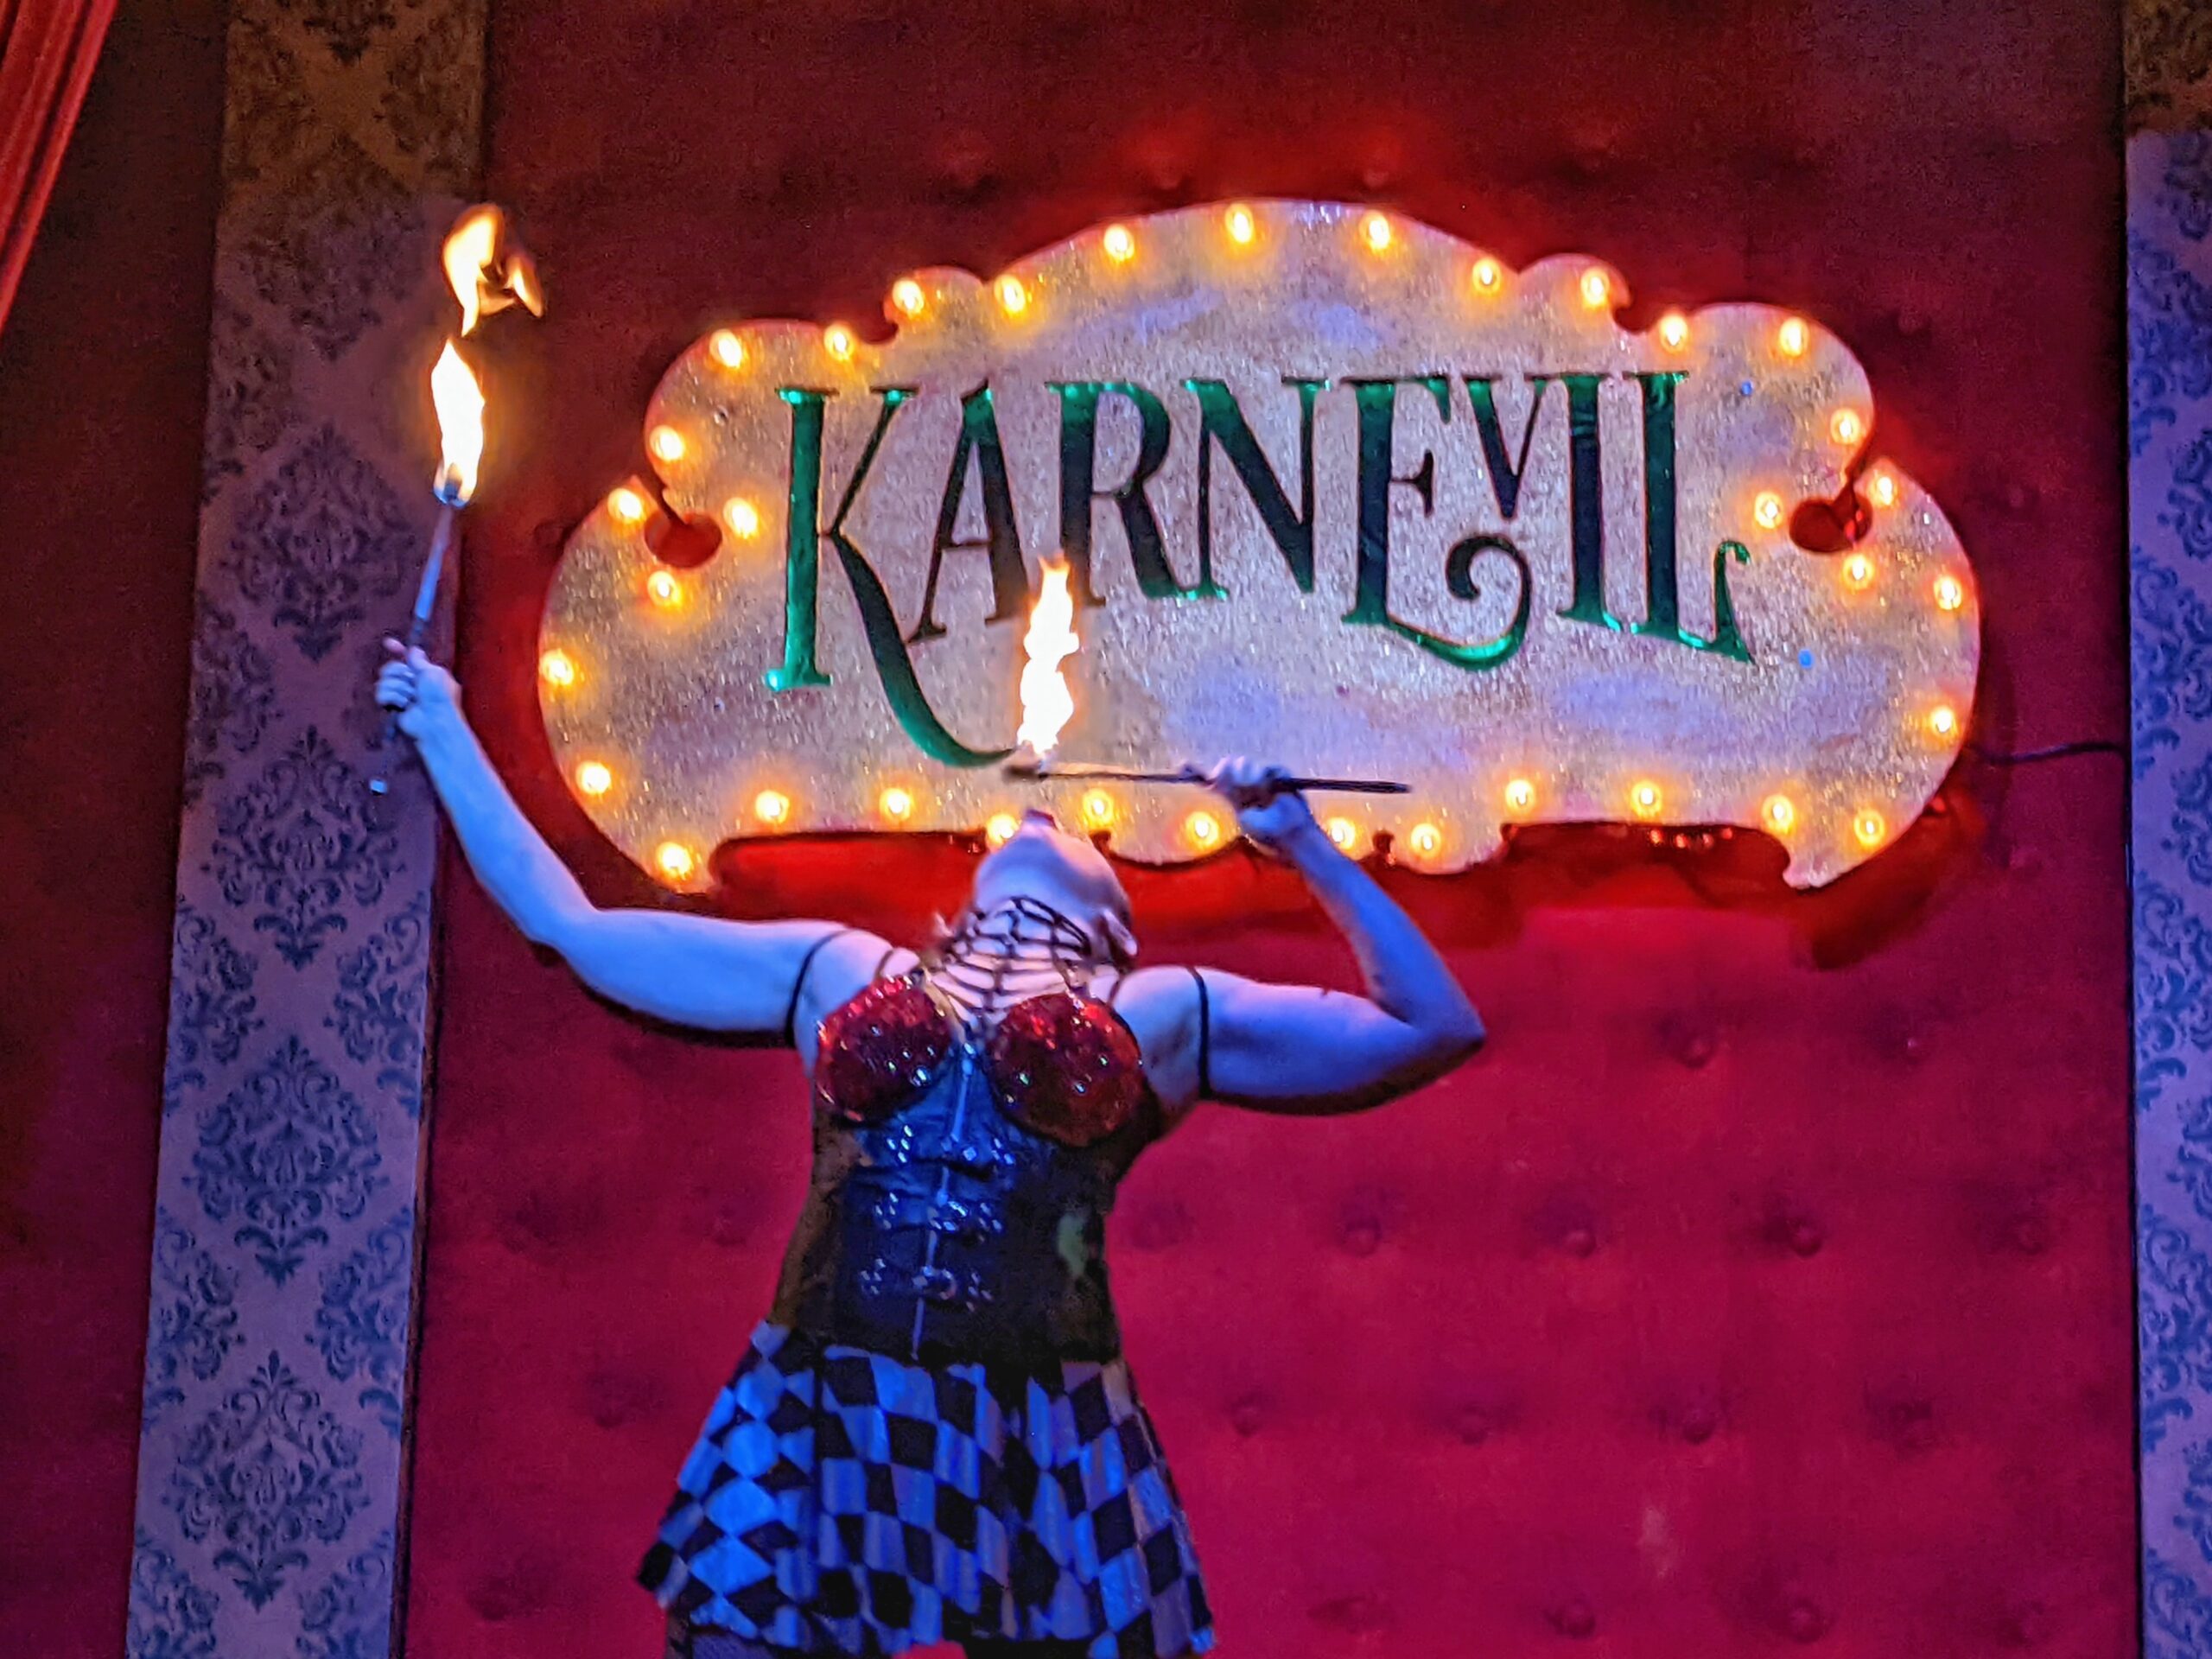 KARNEVIL – What to do in Los Angeles Right Now!